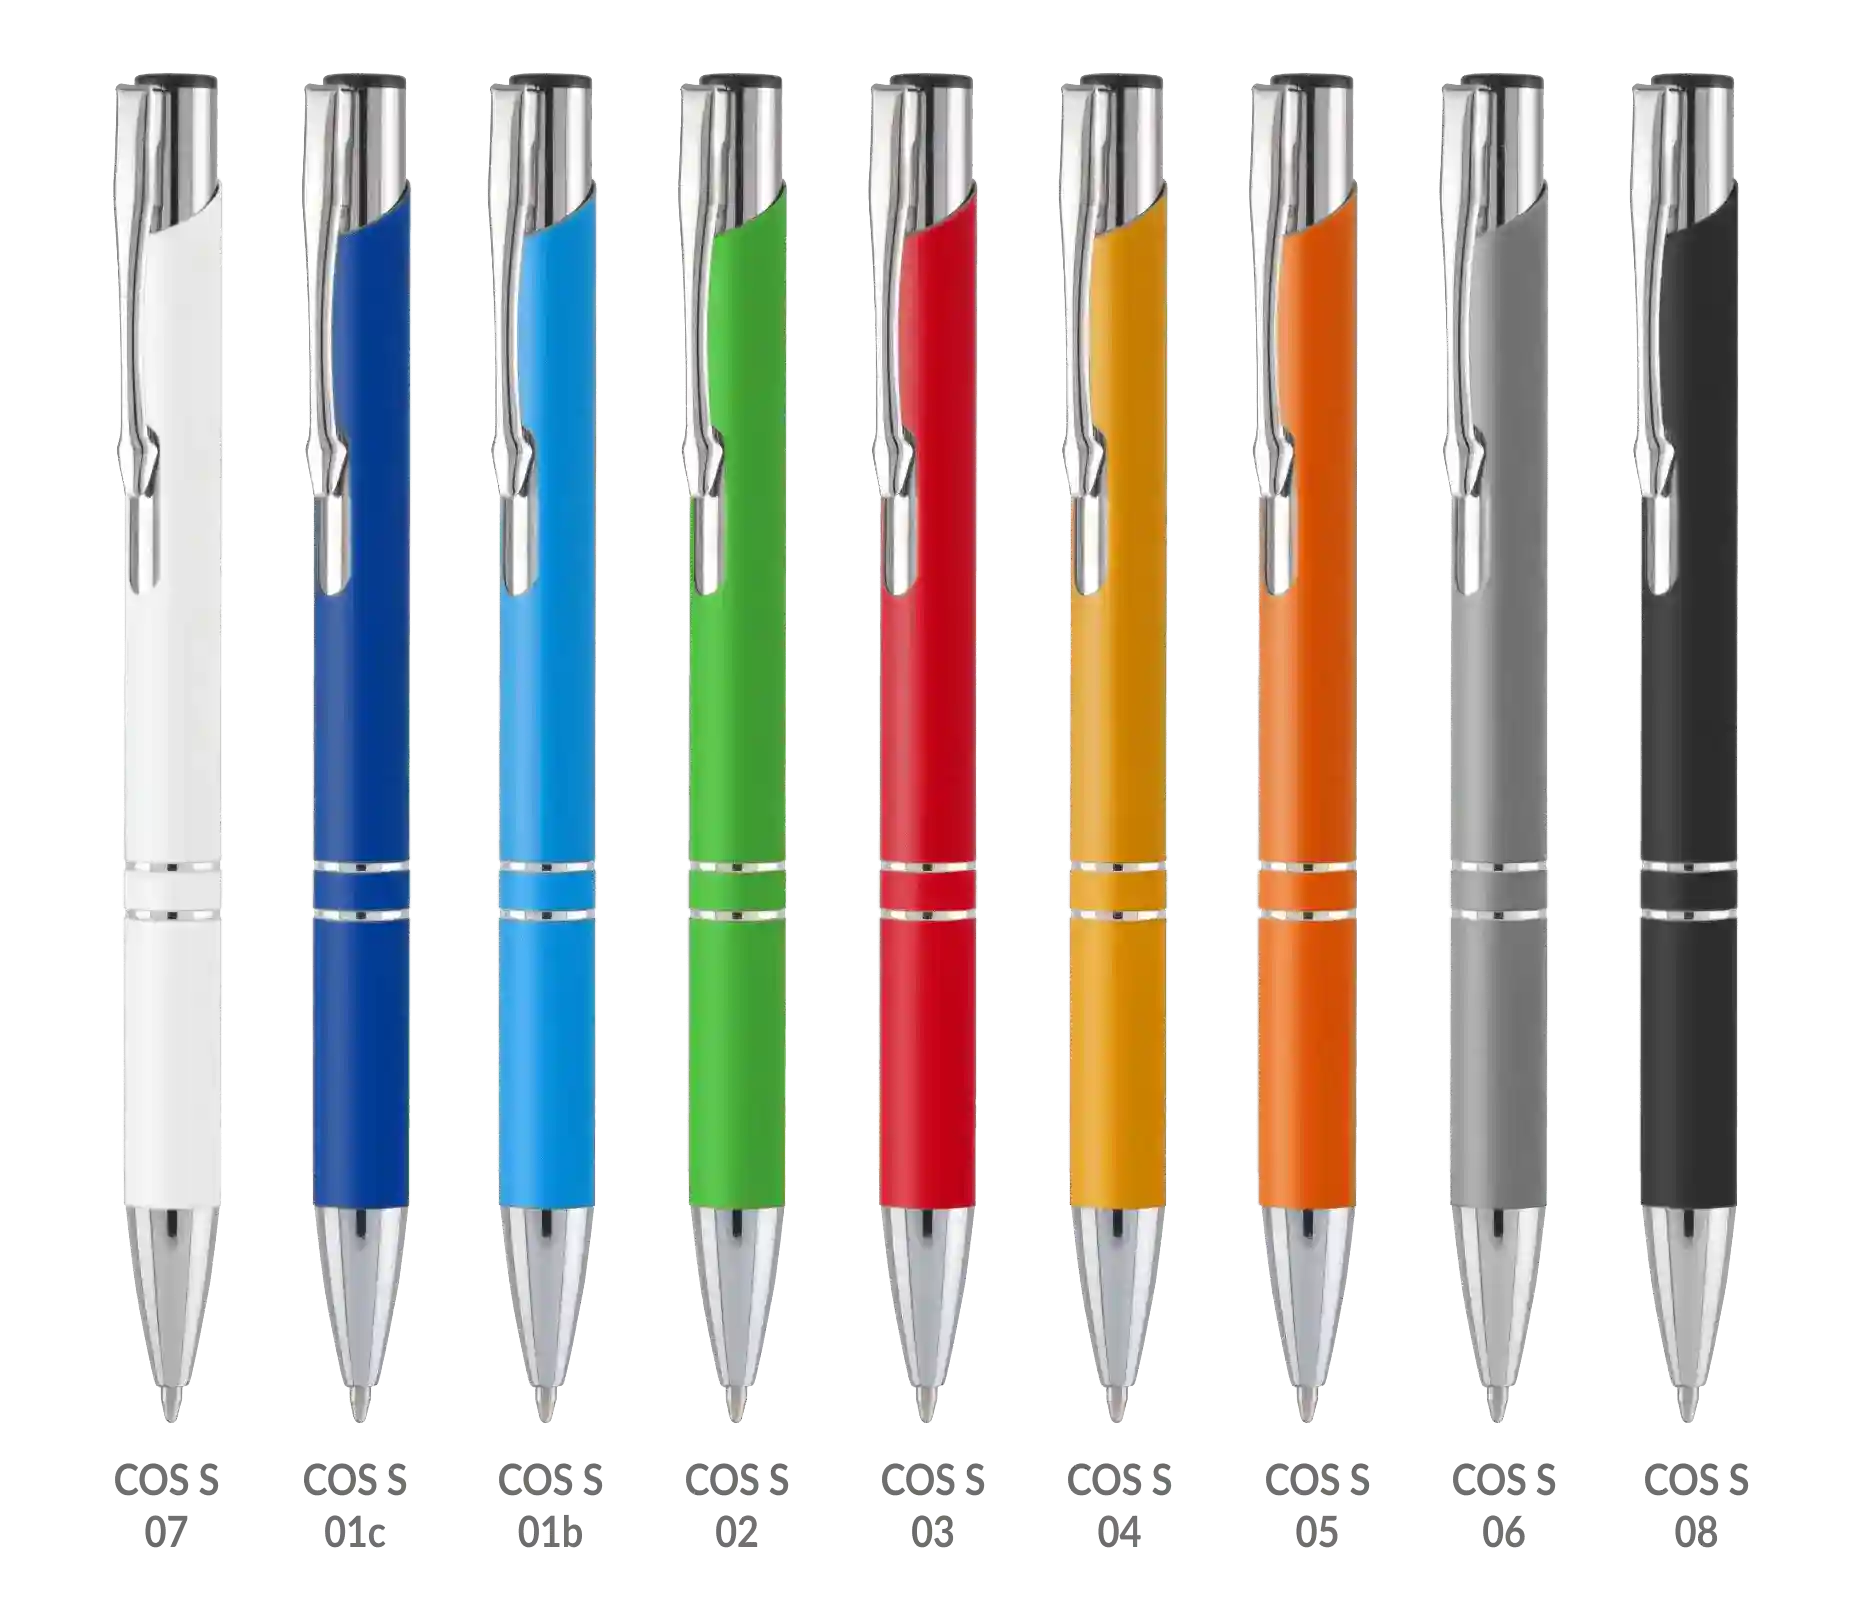 https://pennepersonalizzate.org/wp-content/uploads/2019/12/penne-personalizzate-offerta-softmetalpen.webp